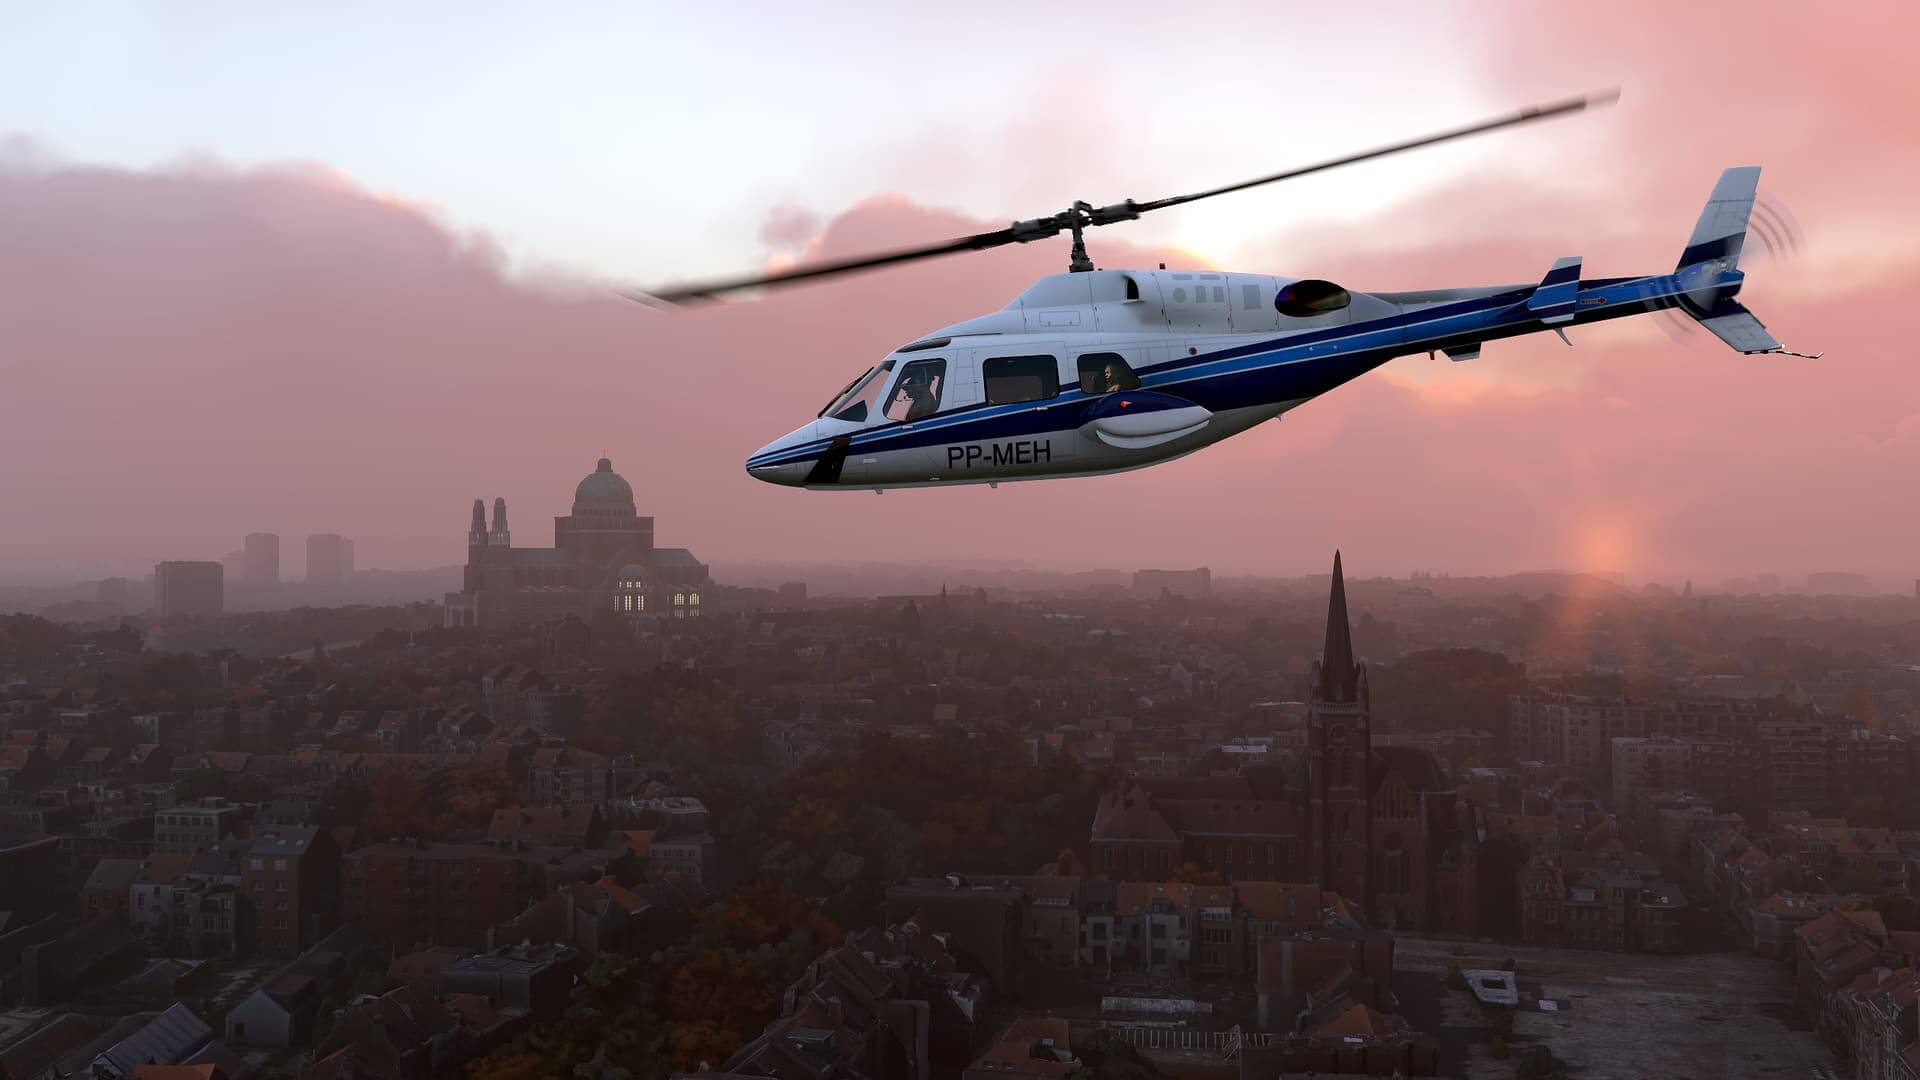 A Bell 407 helicopter passes over a city at dusk.